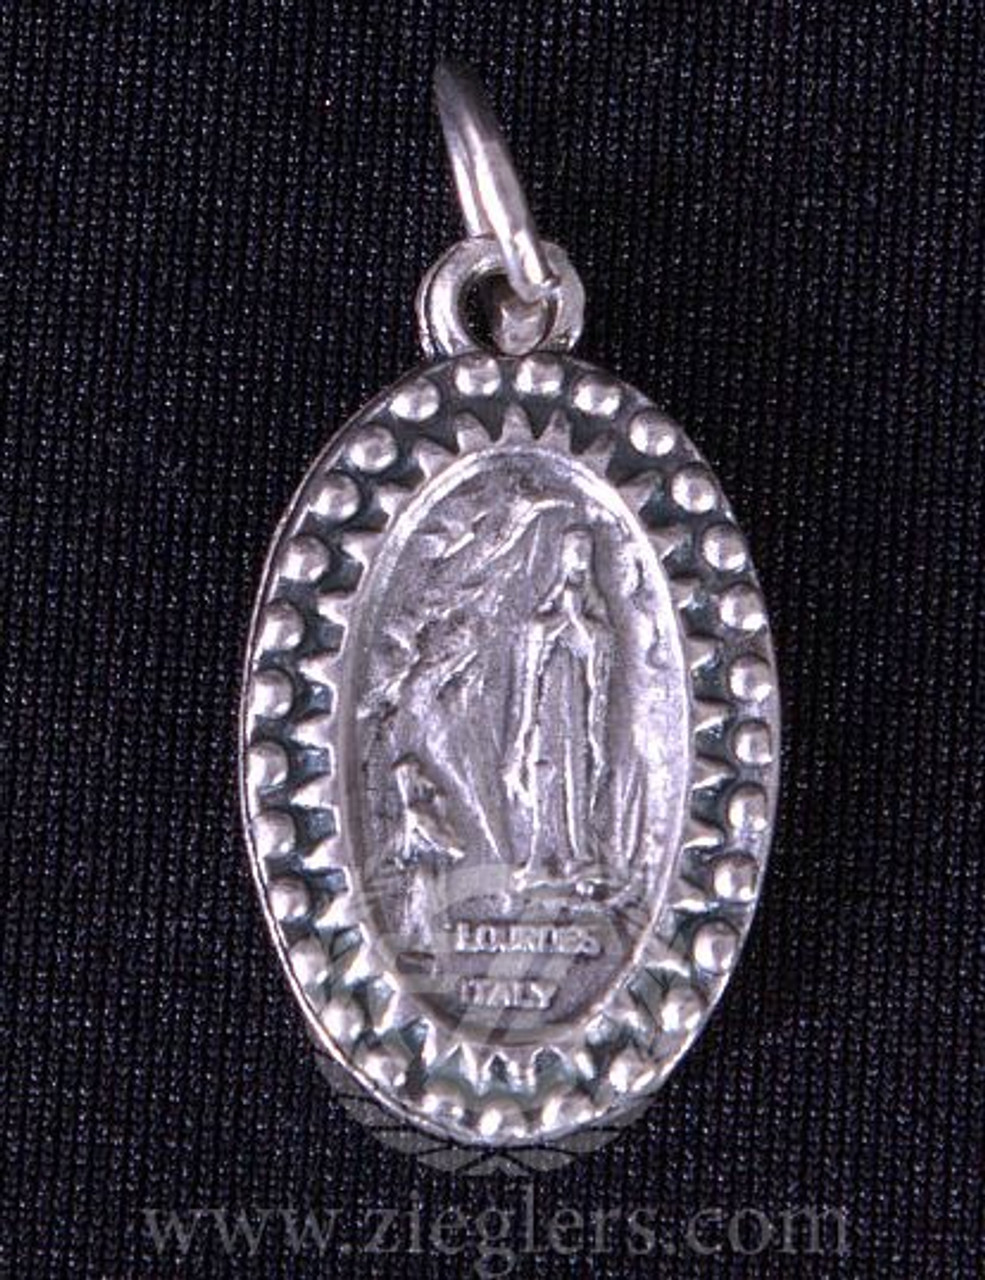 The Miraculous Medal's Connection with Lourdes - The Miraculous Medal Shrine